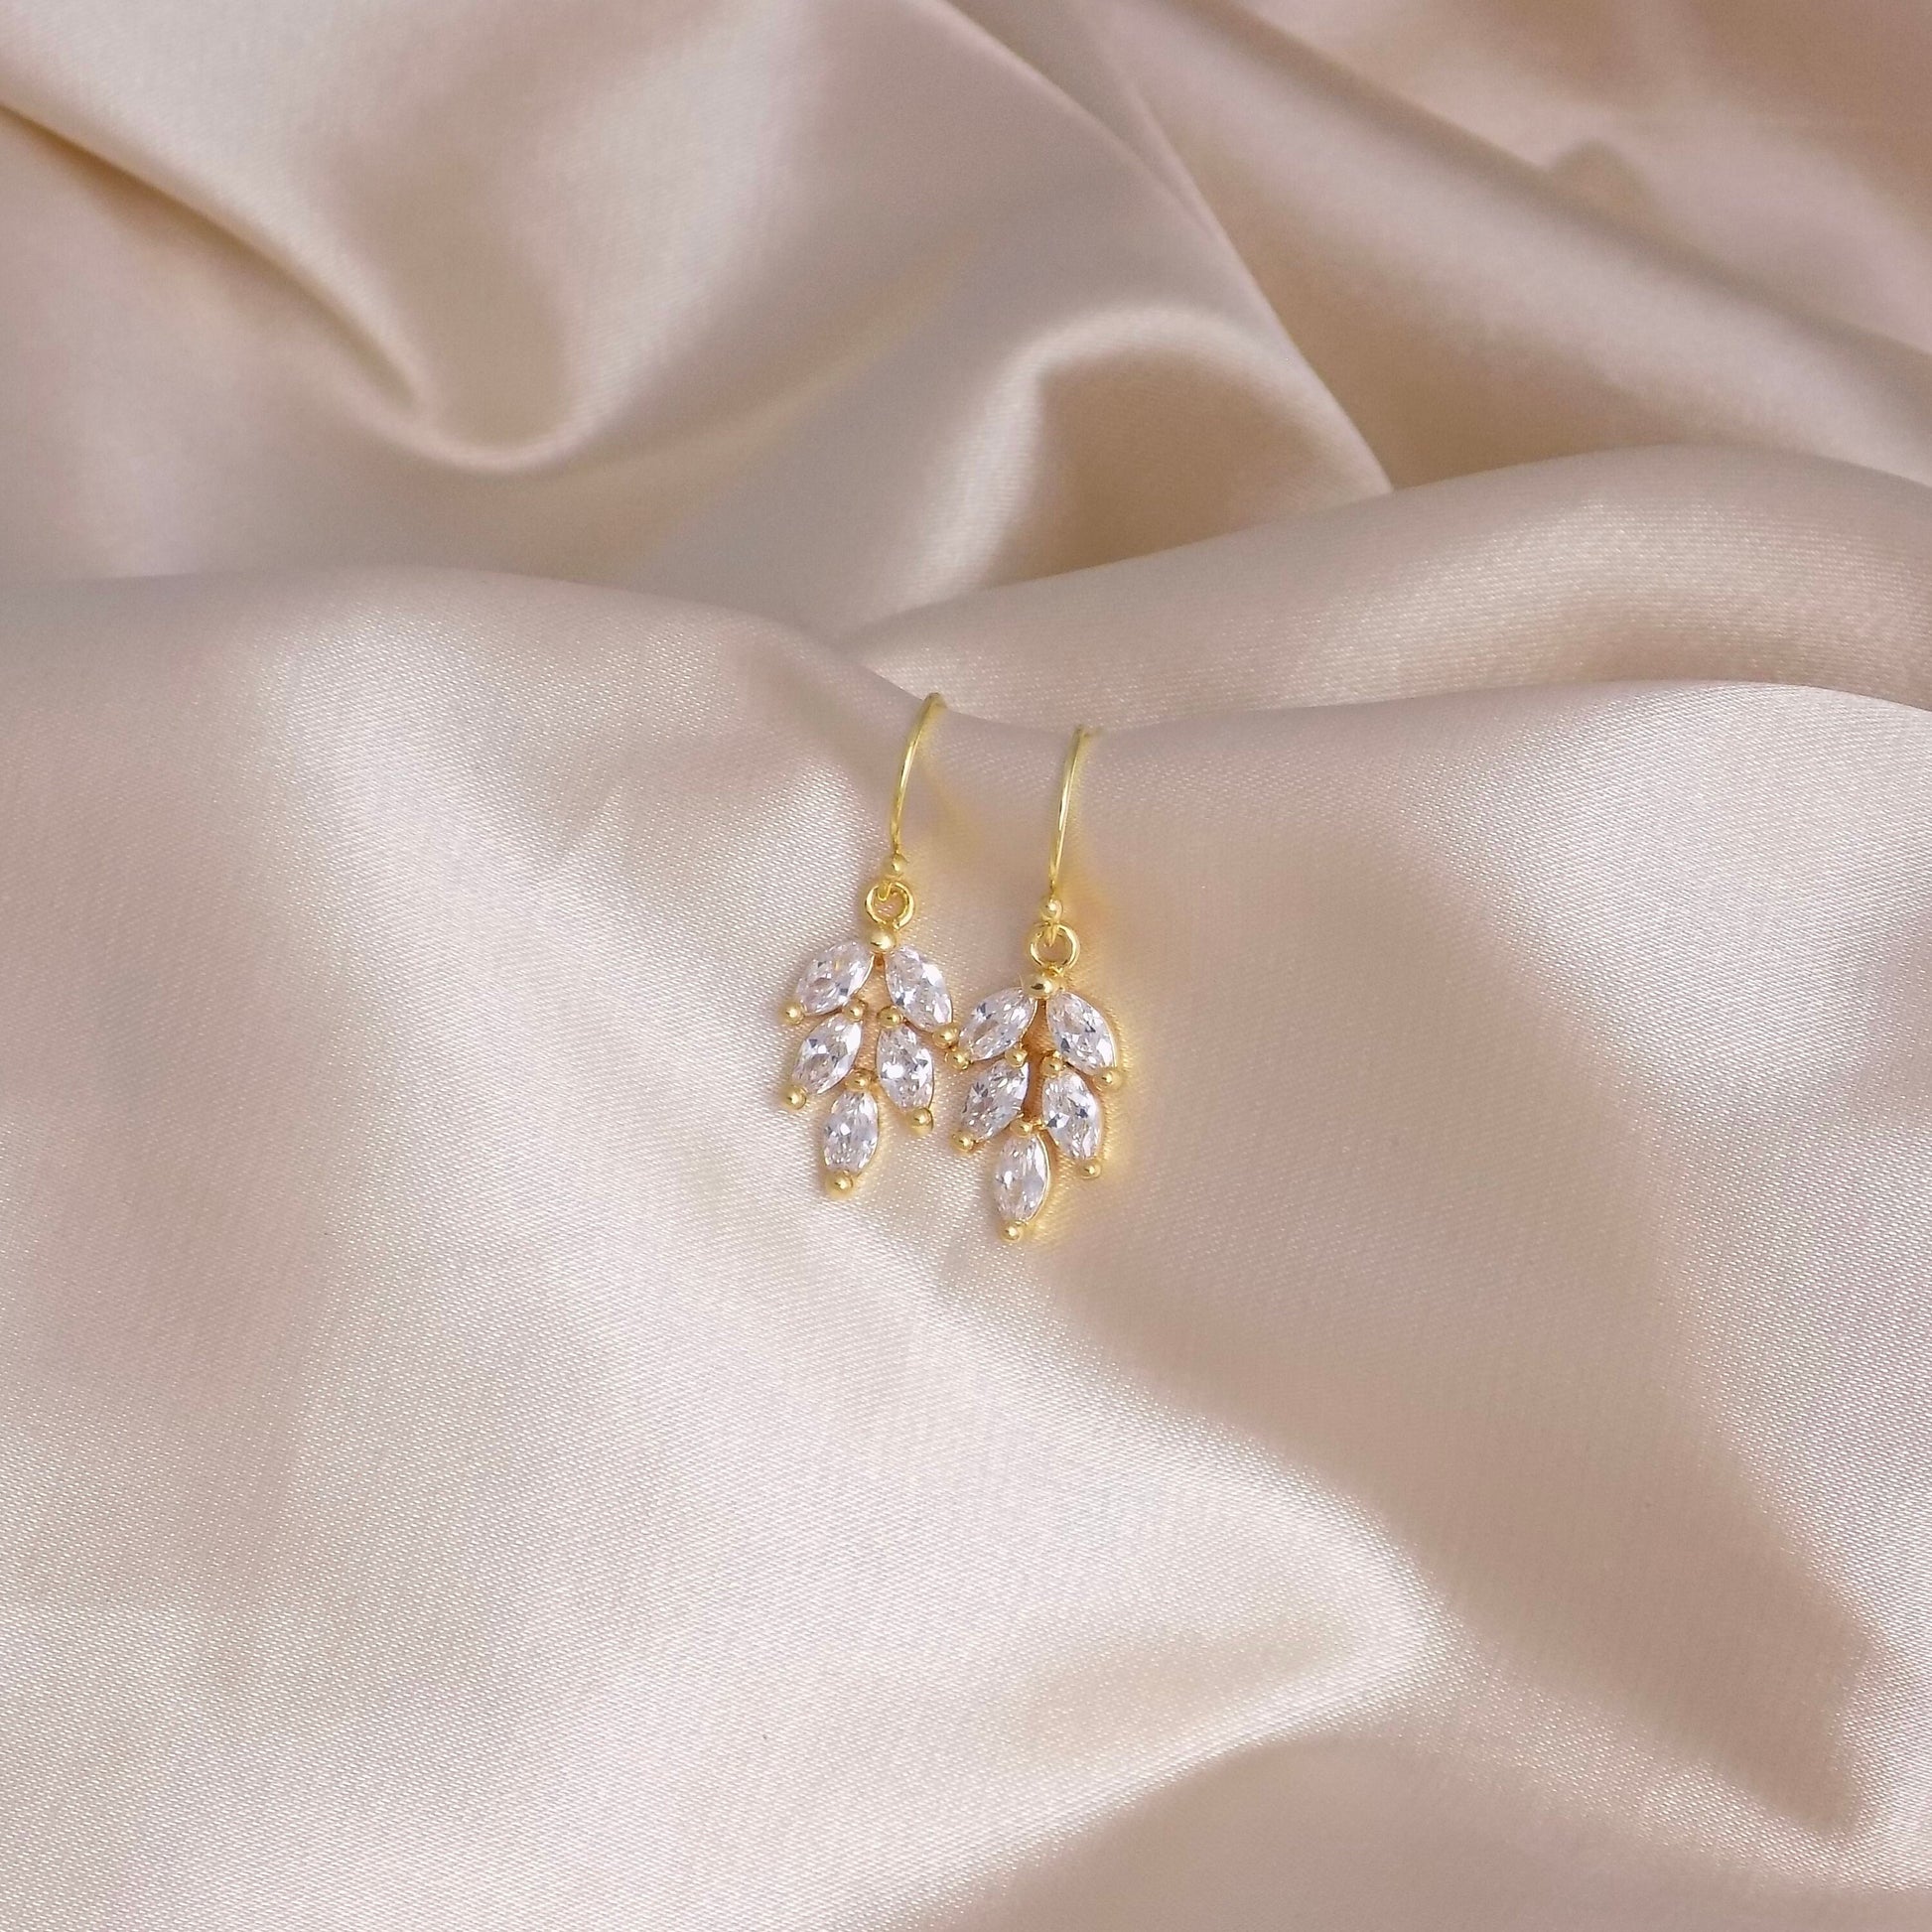 Bridal Earrings, Clear Crystal Sparkly Drop Earrings Gold, Dainty Crystal Dangle, Gifts For Her, M7-42